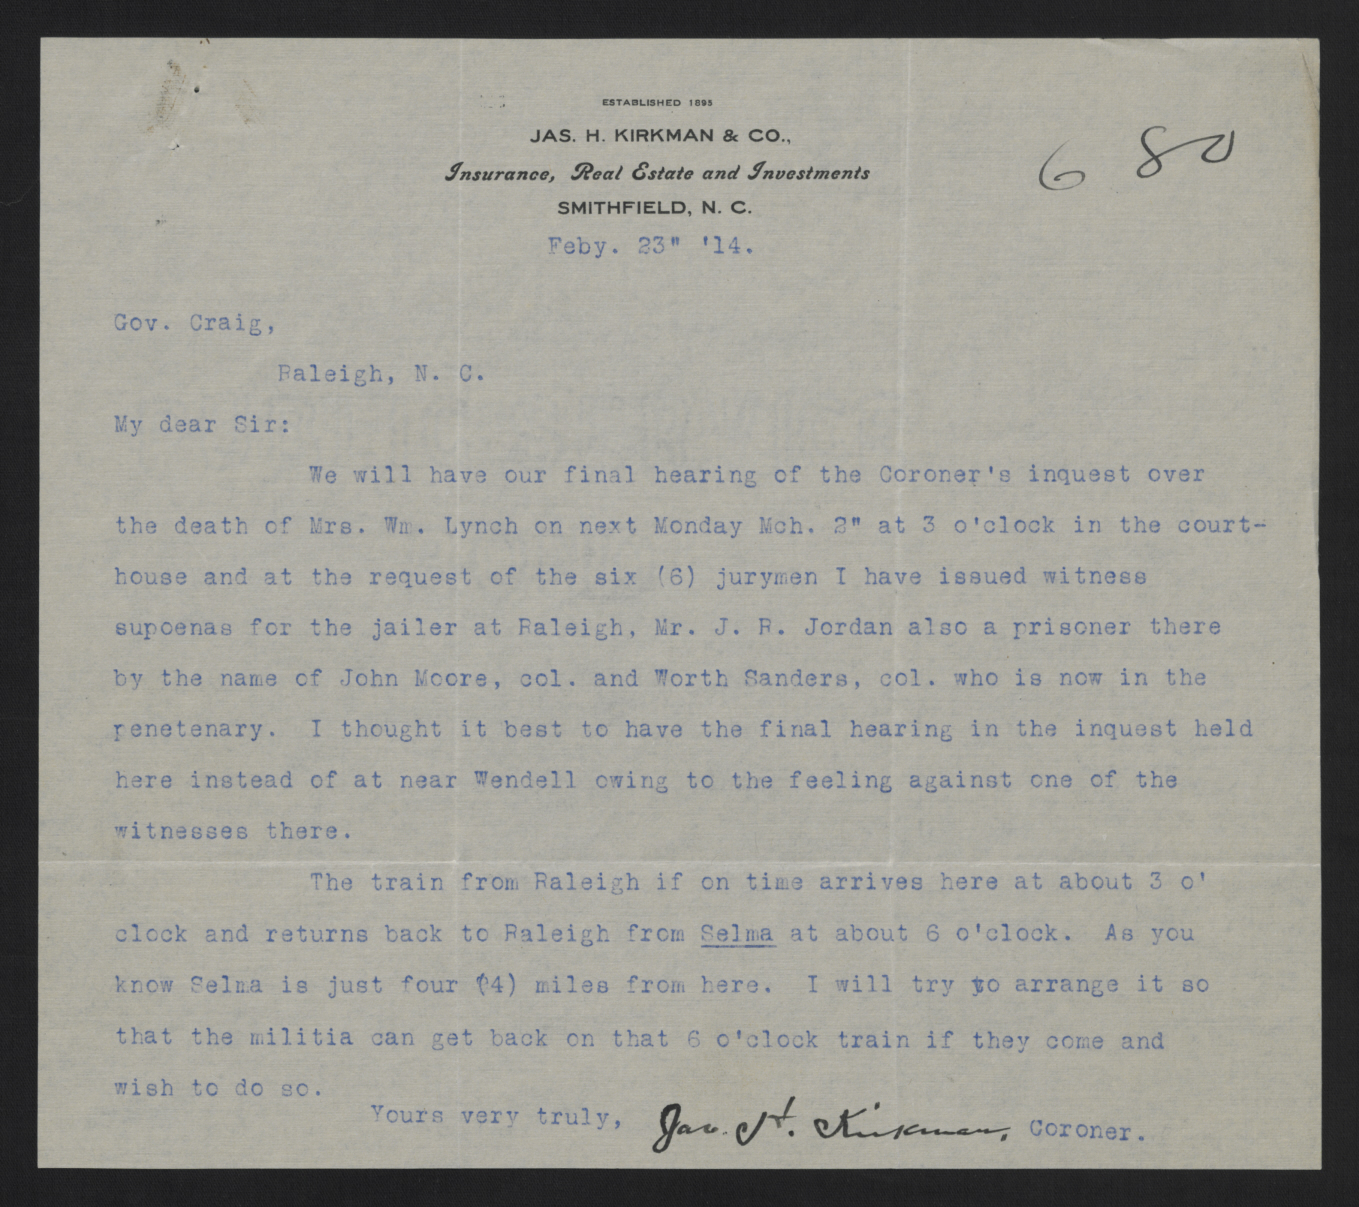 Letter from Kirkman to Craig, February 23, 1914